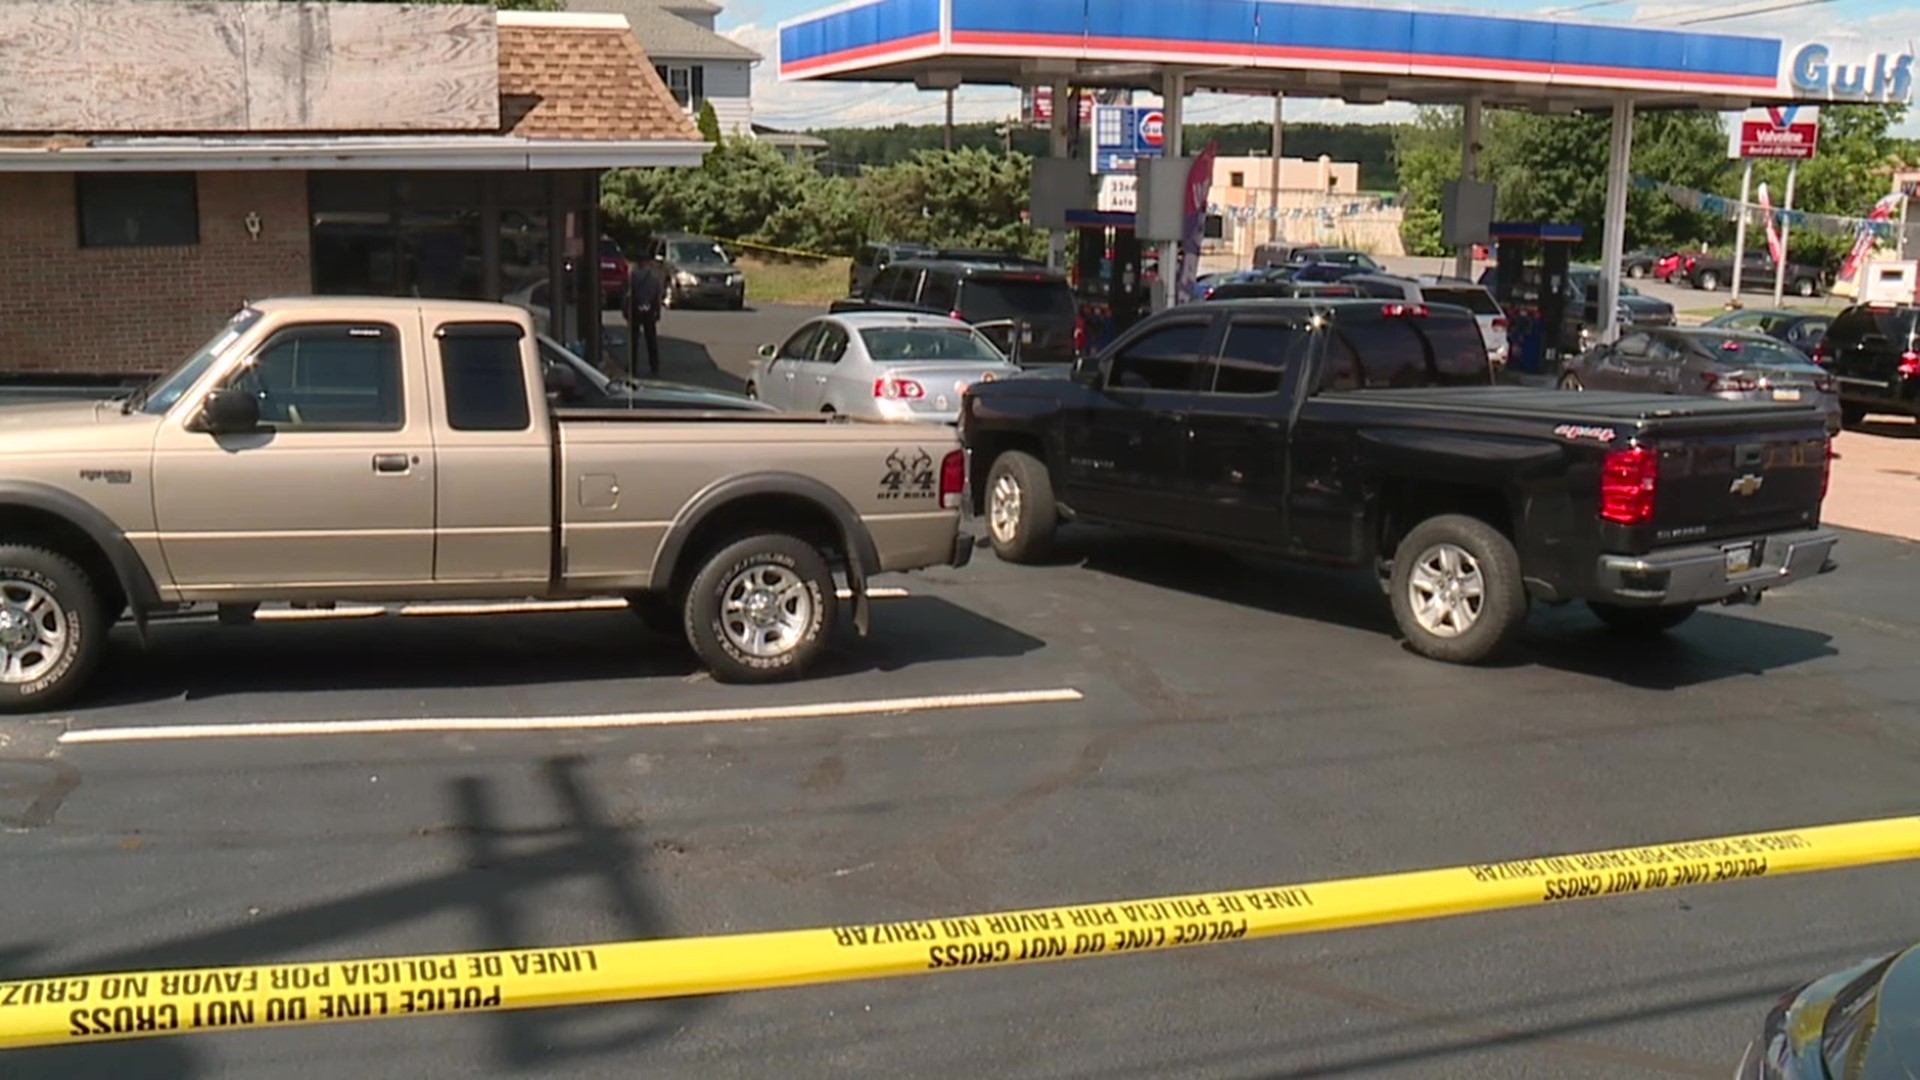 The deadly shooting happened at a service station near Hazleton Wednesday afternoon.